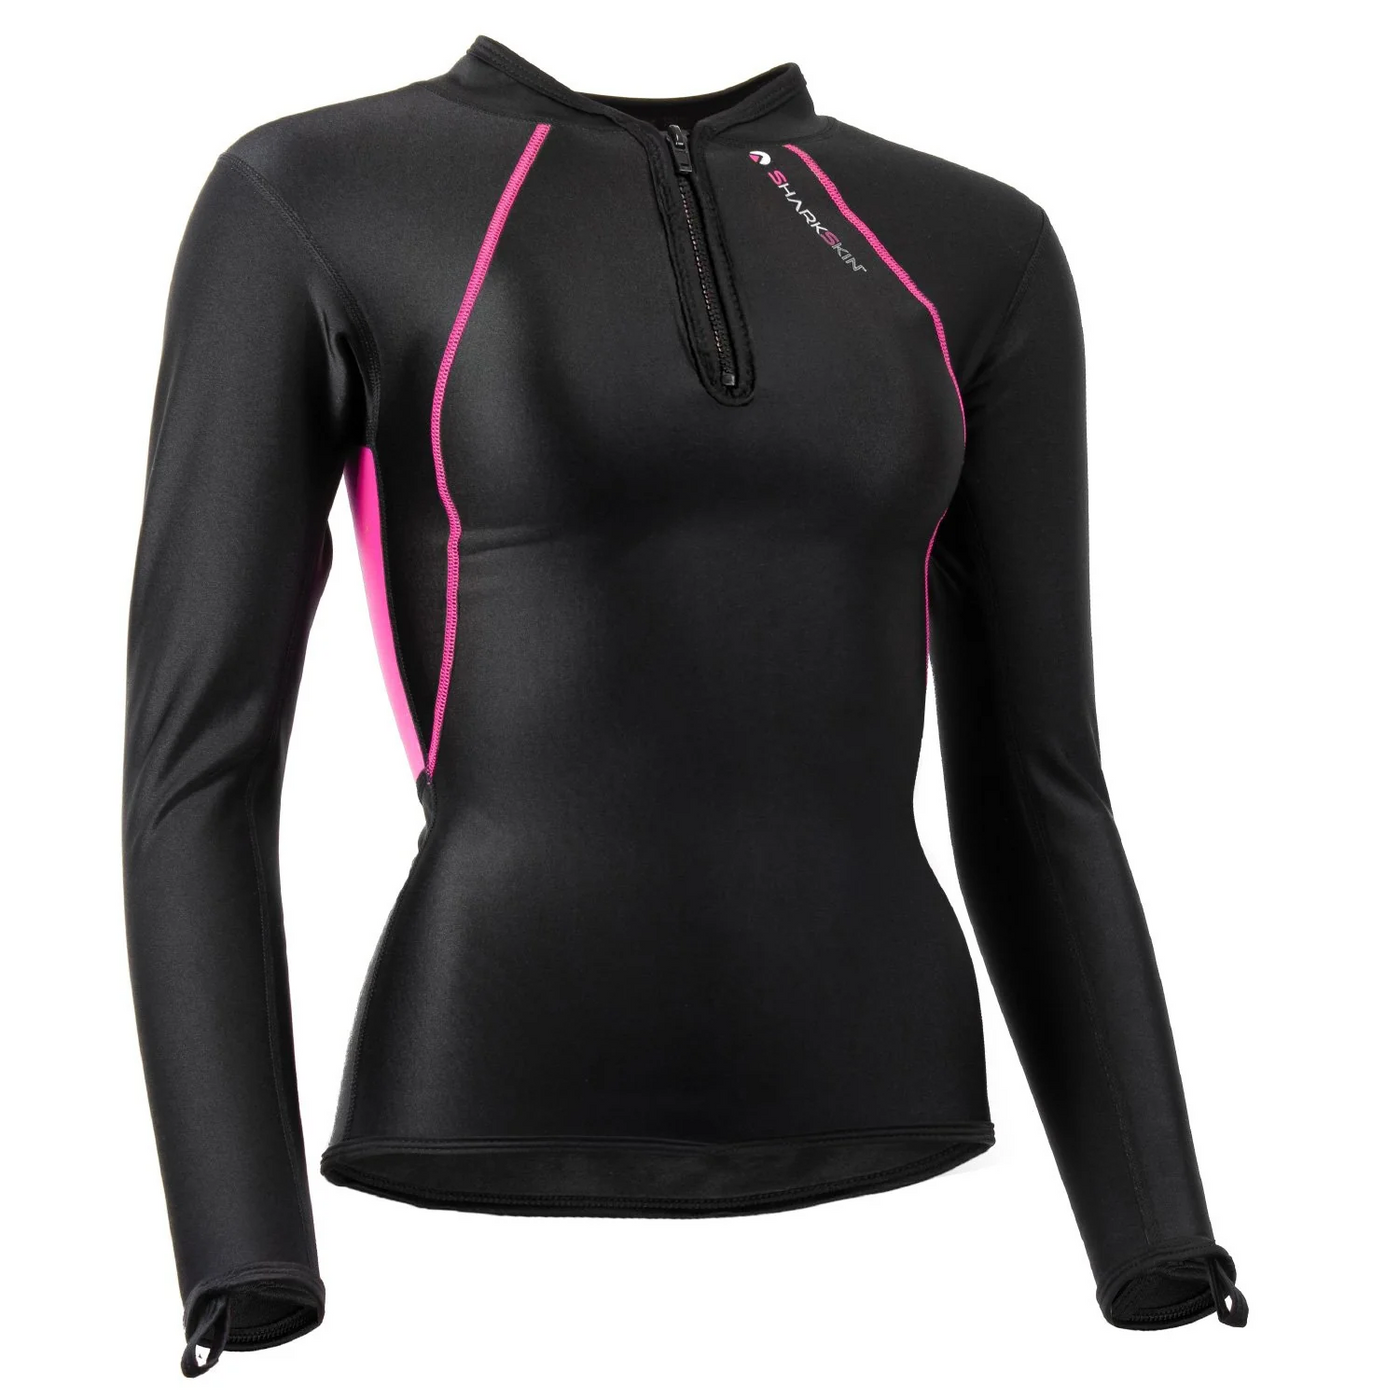 CHILLPROOF LONG SLEEVE CHEST ZIP TOP - WOMENS